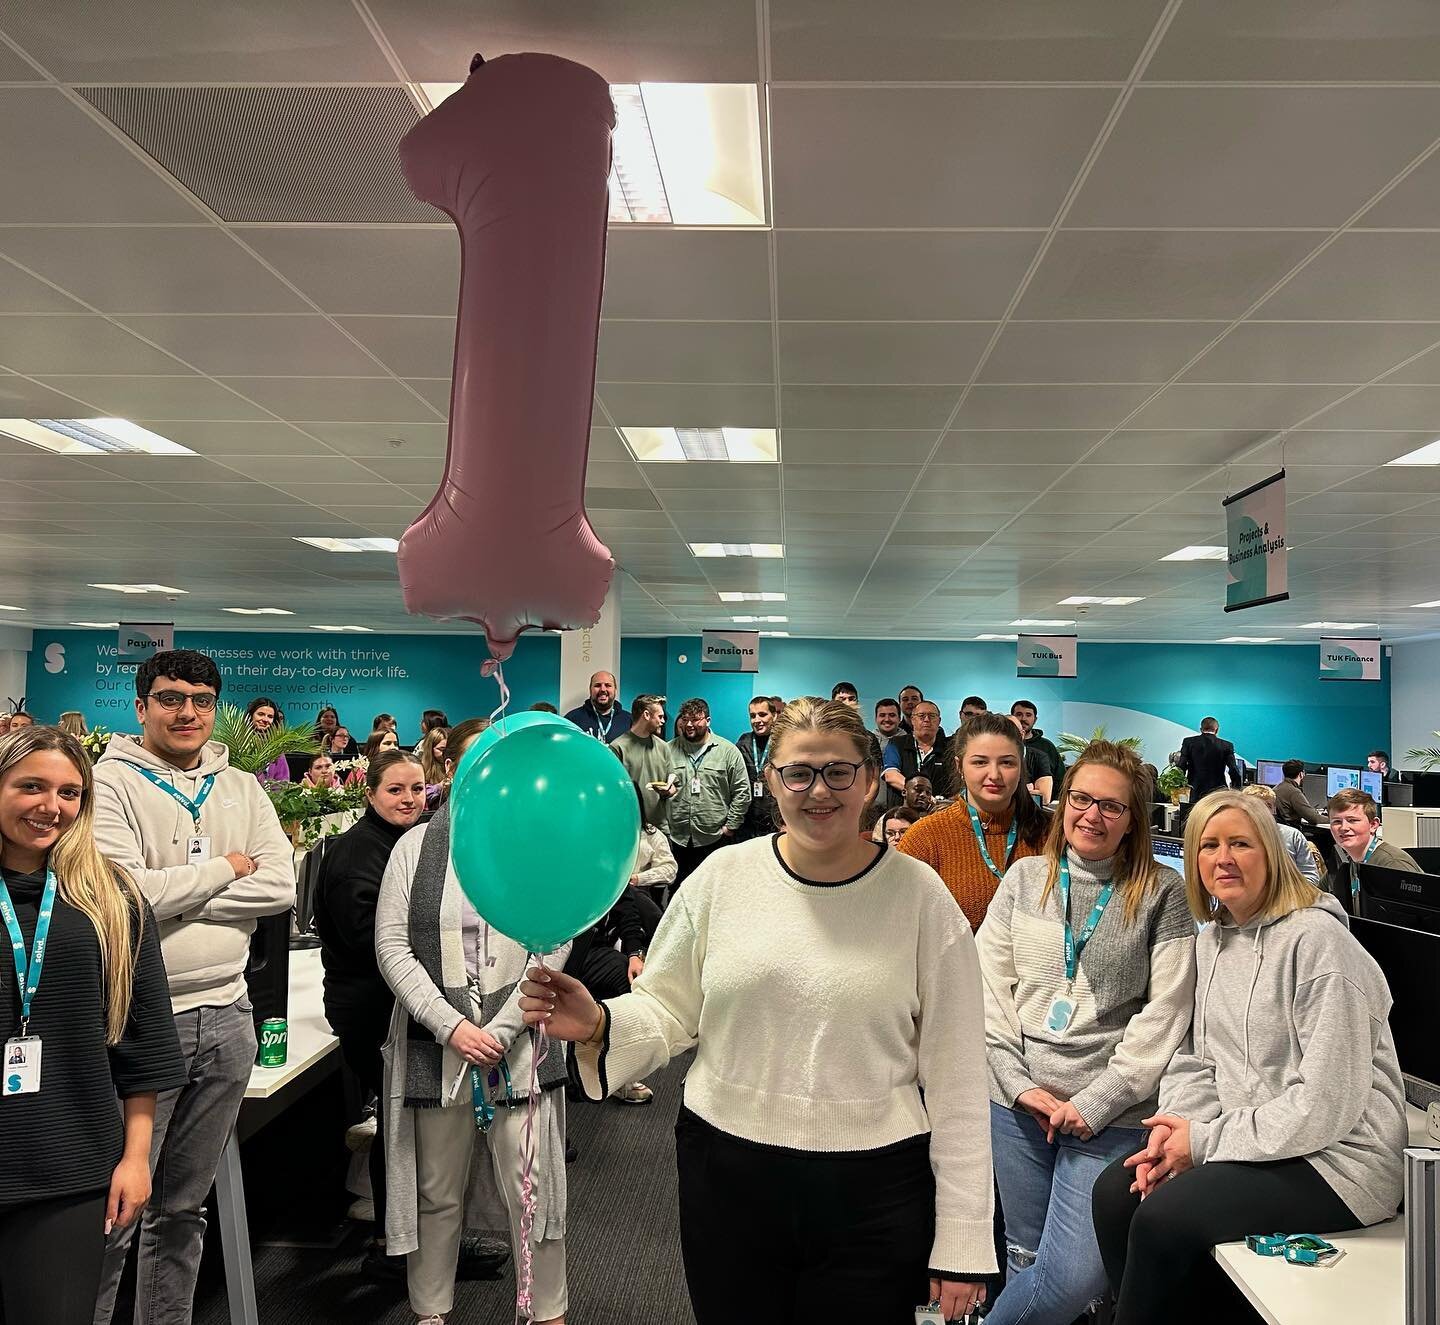 🎊 Solvd. turns 1! 🎊

We celebrated our 1st anniversary here at Solvd. today with our colleagues. It was the perfect day to reflect and celebrate our achievements over the last year along with some fun and cake 🧁🎉

Thanks to all our collaborators,